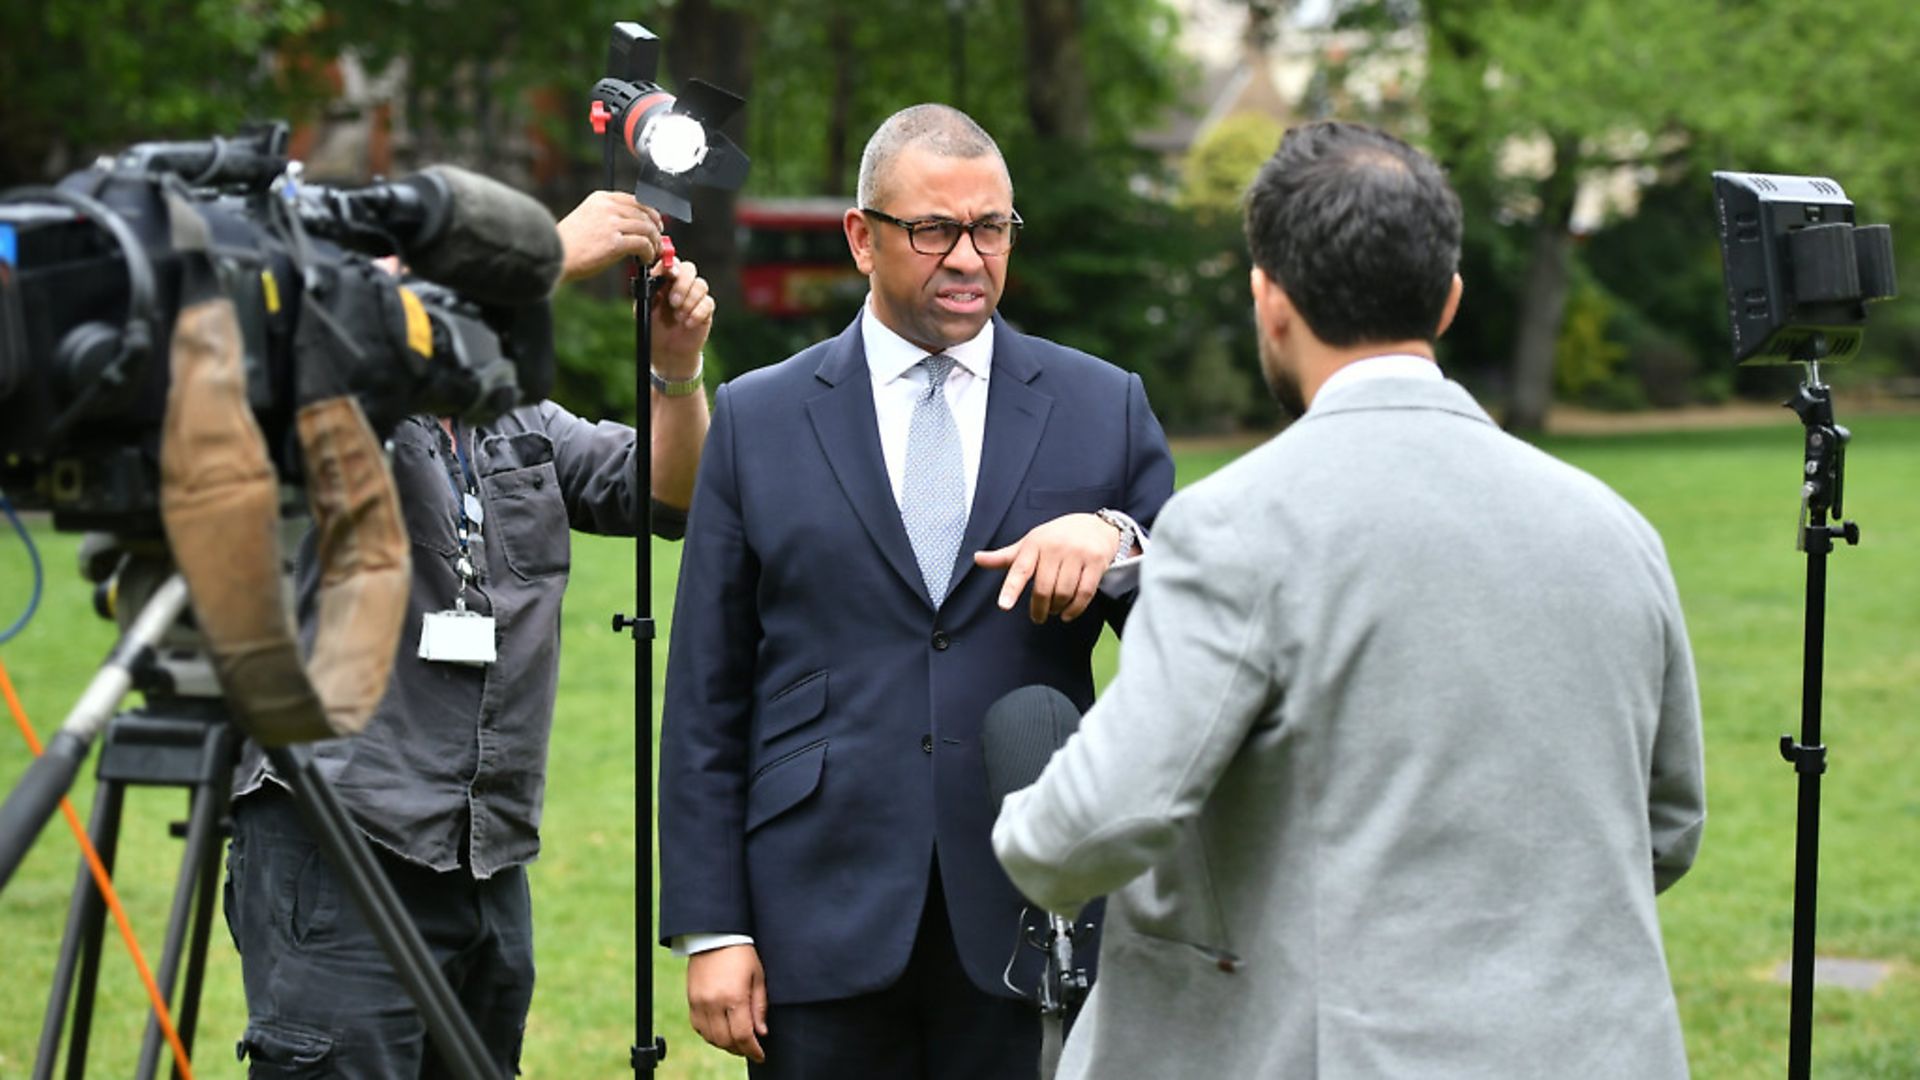 James Cleverly preparing for a media appearance. The Conservative party's suggested Q&A answers have been leaked ahead of the general election. Picture: Dominic Lipinski/PA Wire/PA Images - Credit: PA Wire/PA Images